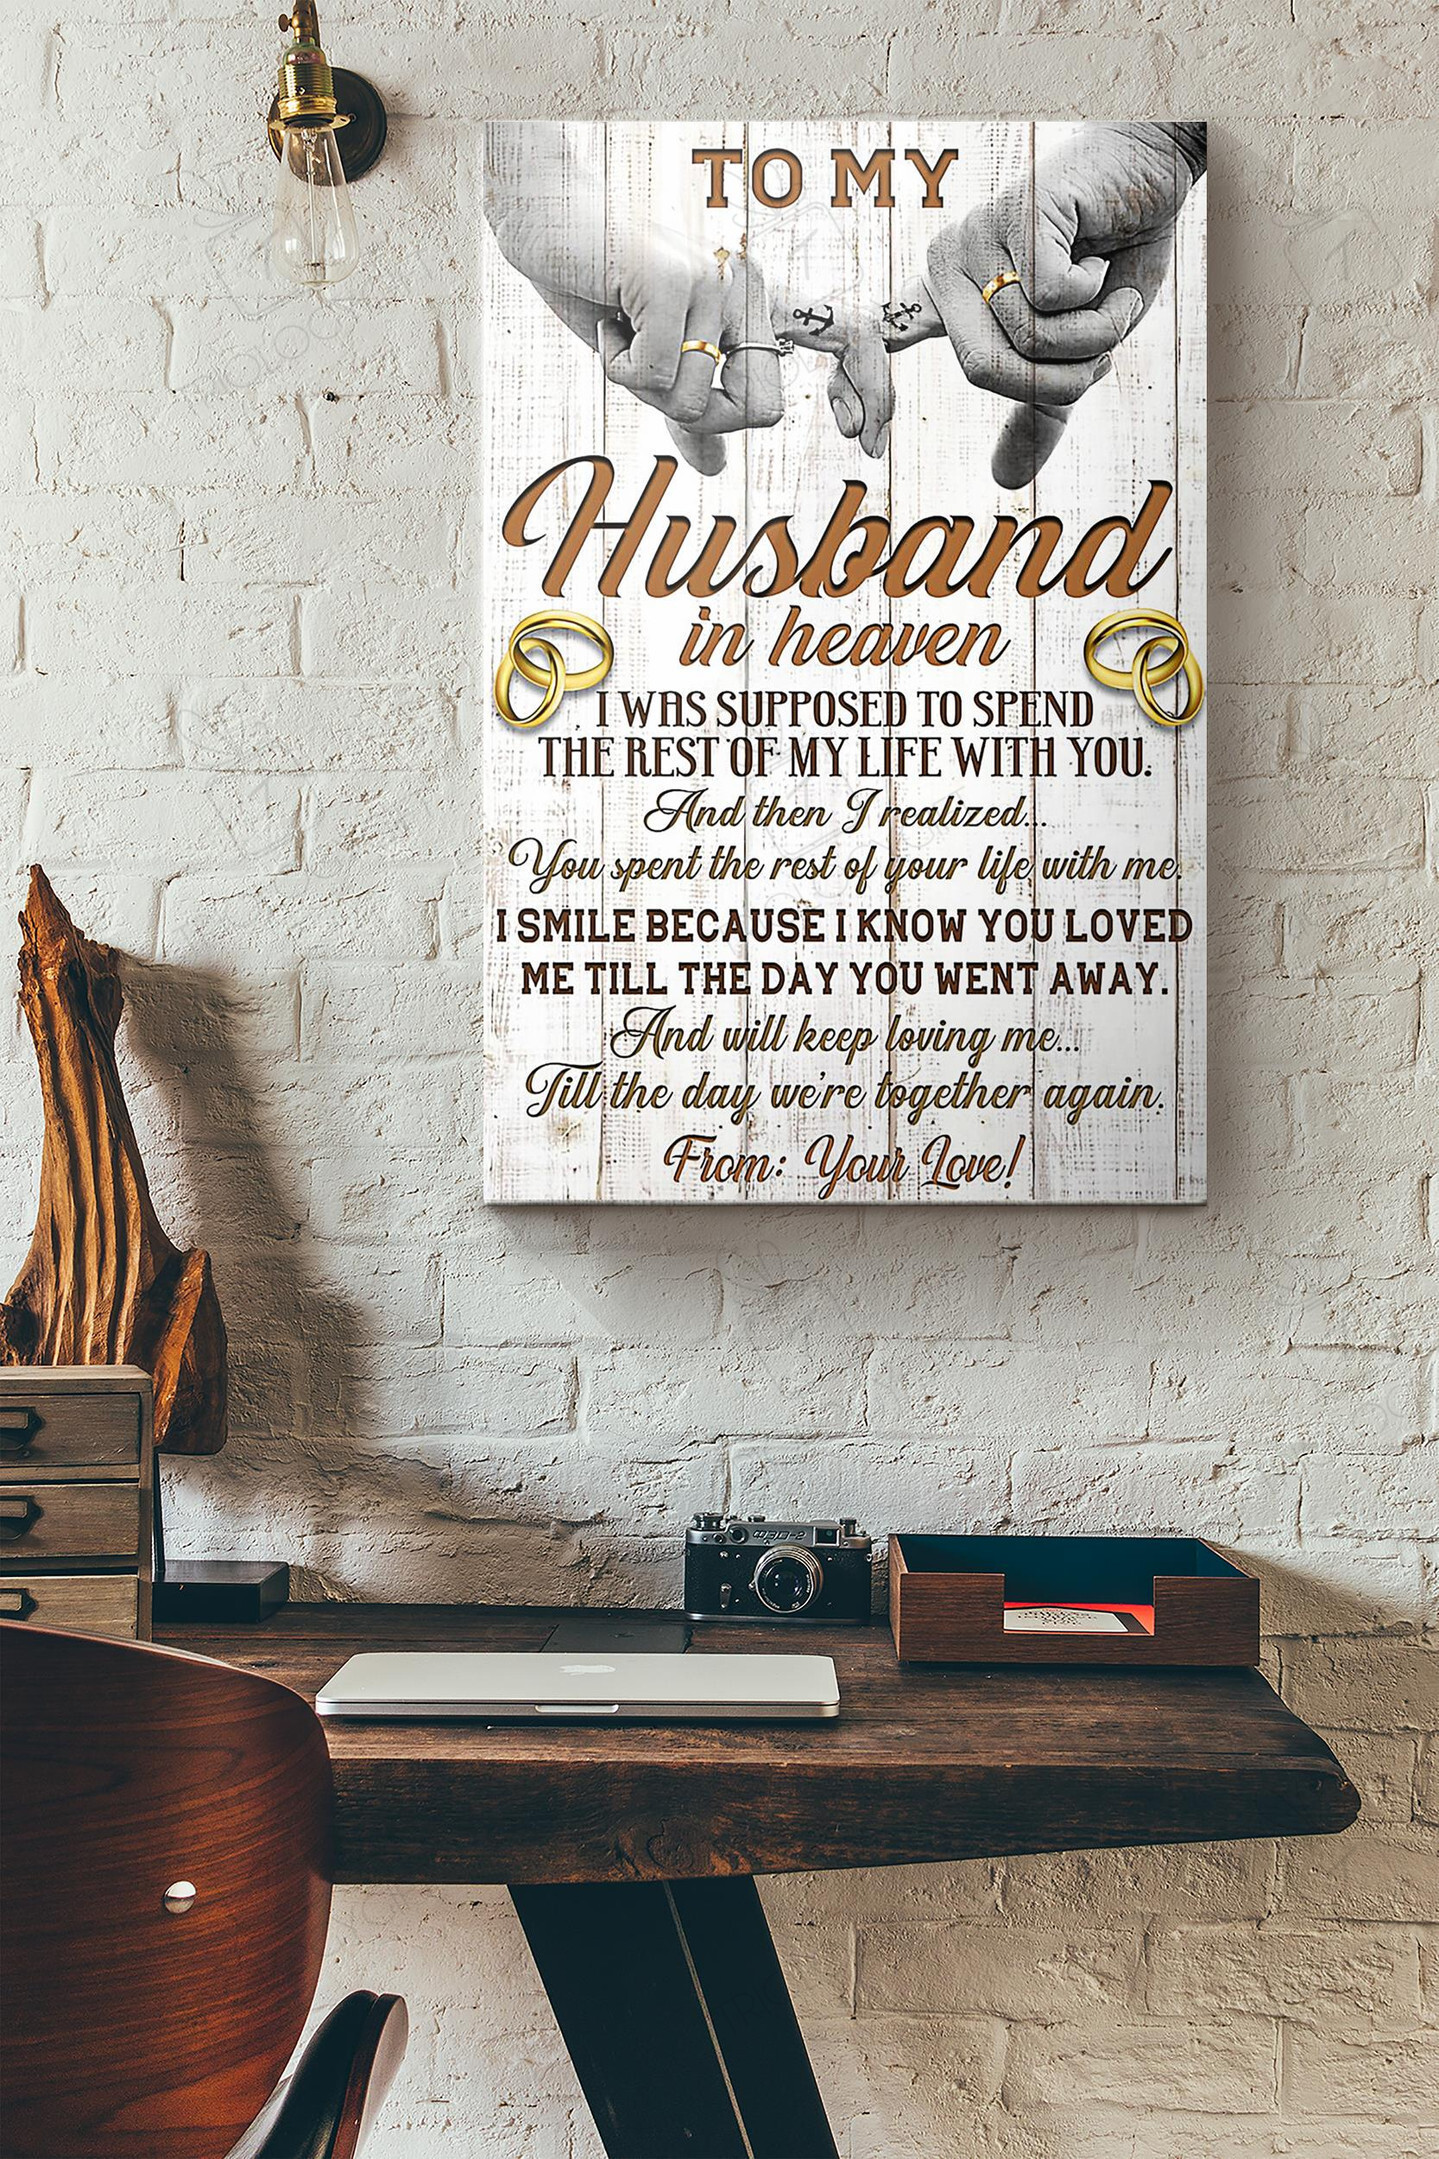 To My Husband In Heaven Canvas Painting Ideas, Canvas Hanging Prints, Gift Idea Framed Prints, Canvas Paintings Wrapped Canvas 8x10